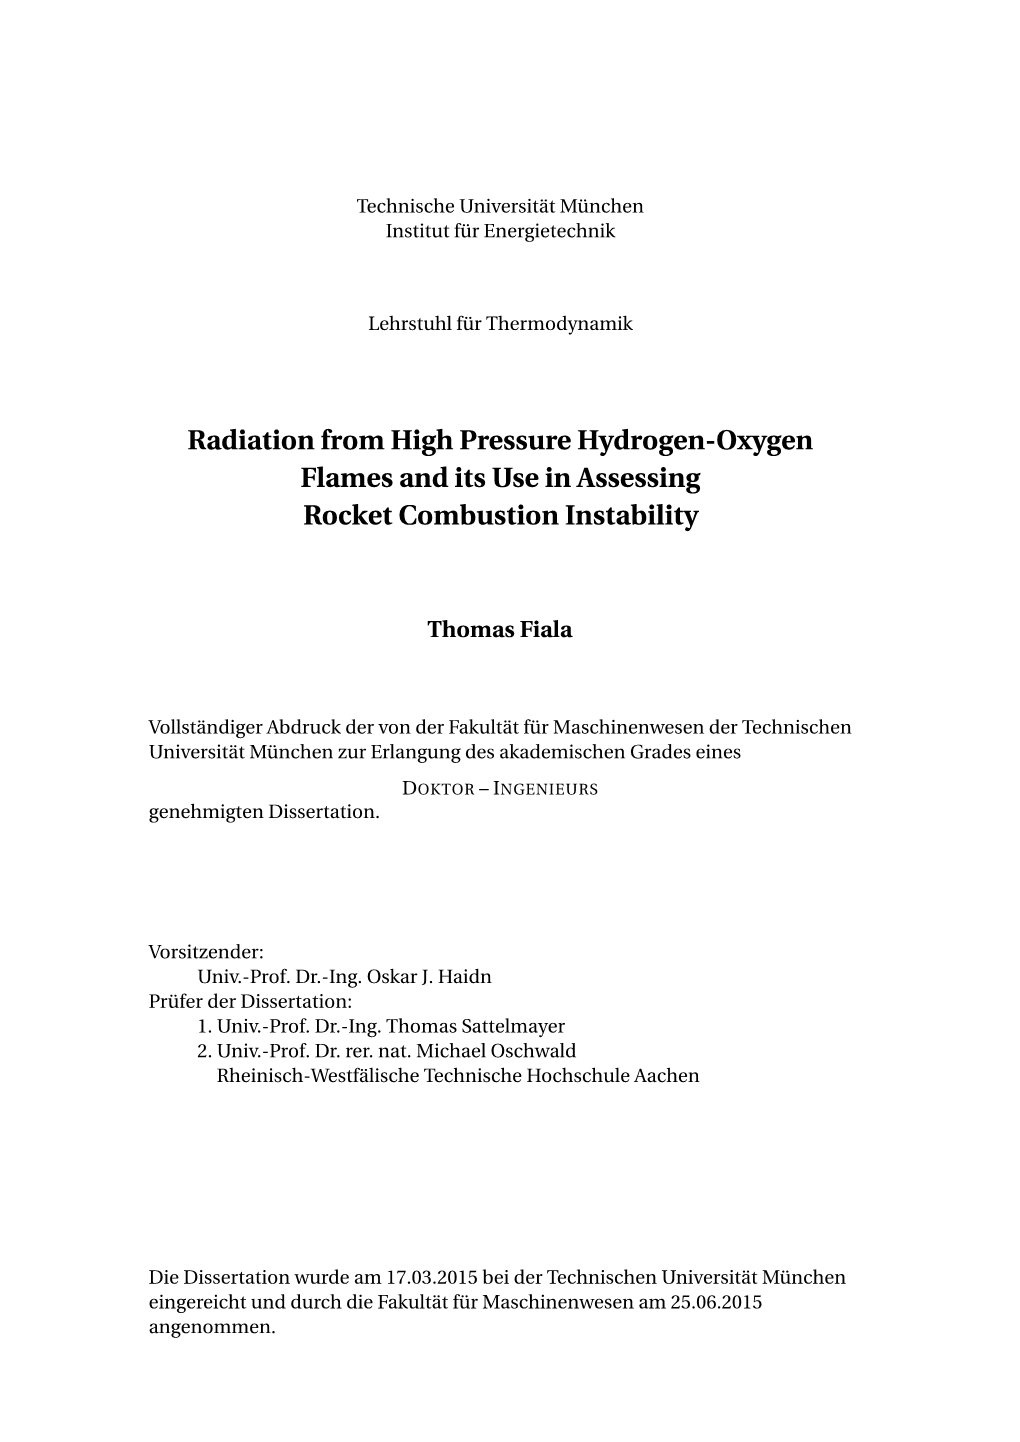 Radiation from High Pressure Hydrogen-Oxygen Flames and Its Use in Assessing Rocket Combustion Instability